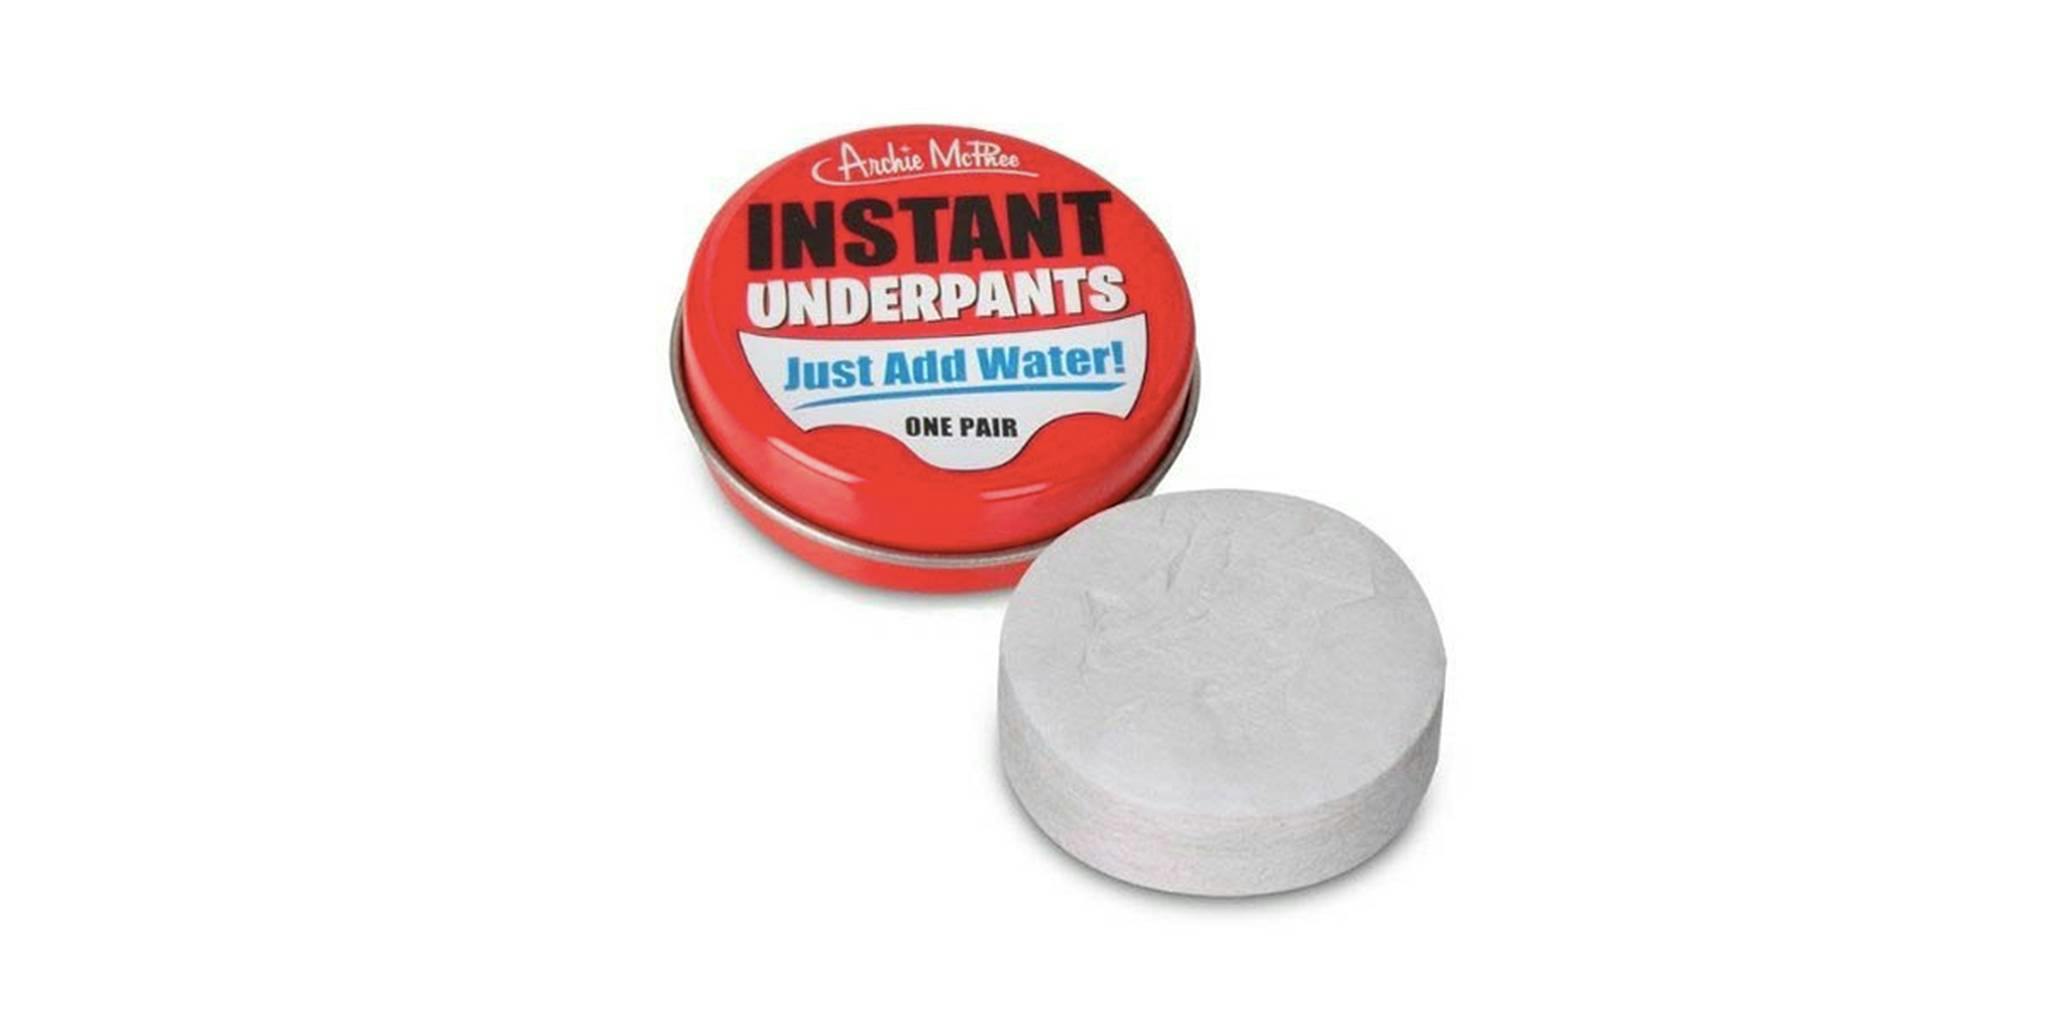 Instant Underpants - Just Add Water!